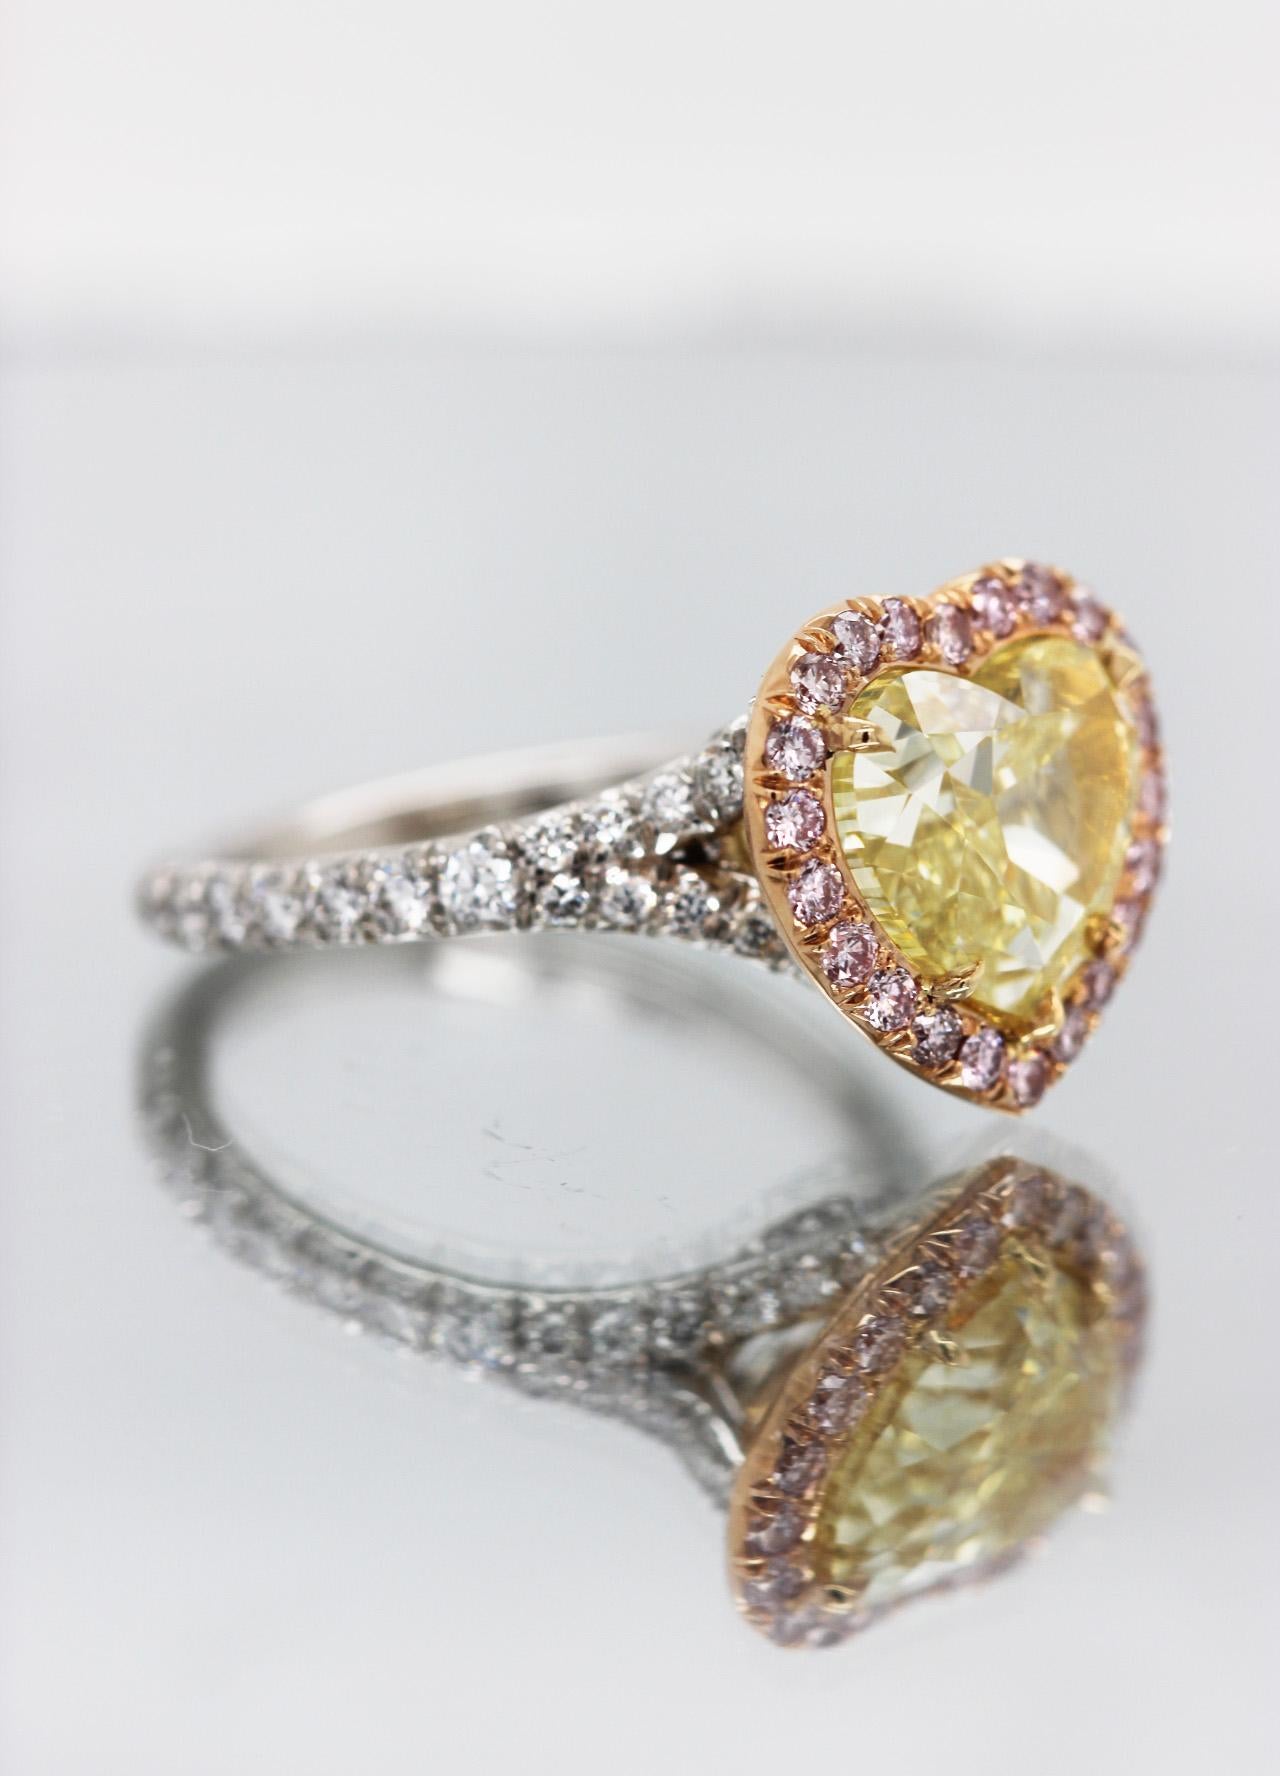 4.51 Carat Fancy Yellow Heart-Shaped Diamond Engagement Ring VVS2 GIA Scarselli In New Condition For Sale In New York, NY